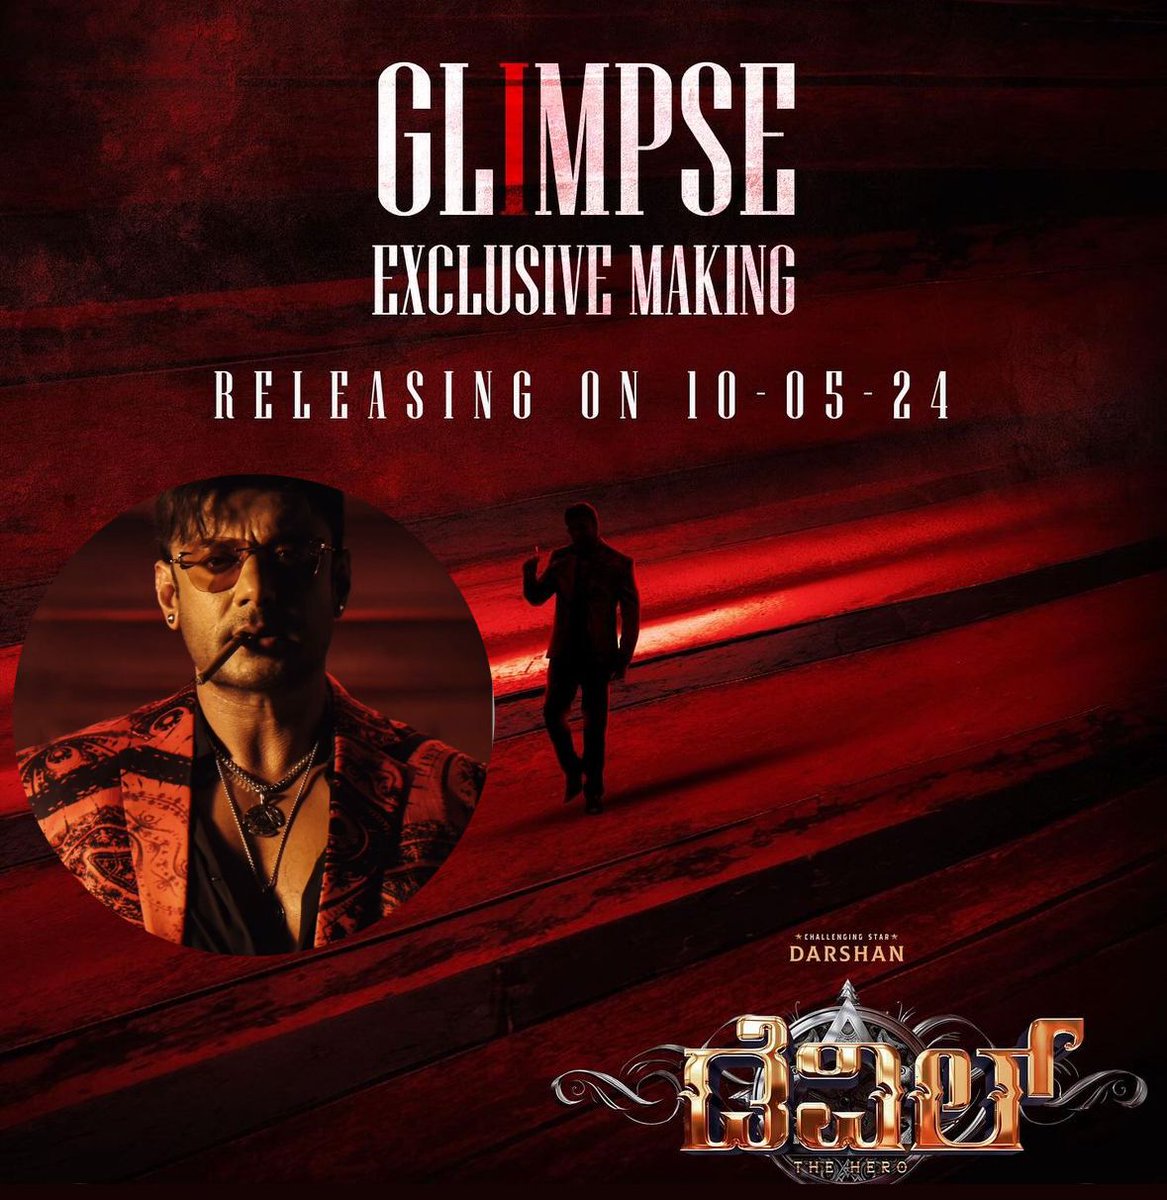 .@dasadarshan fans, cherish! The #Devil team is set to release the ‘making glimpse’ this #Friday. Are you ready to witness #TheDevil in raw avatar? #Darshan #Dboss #Darshanthoogudeepa #Dbossfans #Darshanfans #Kannadafilms #Kannadafilmupdates